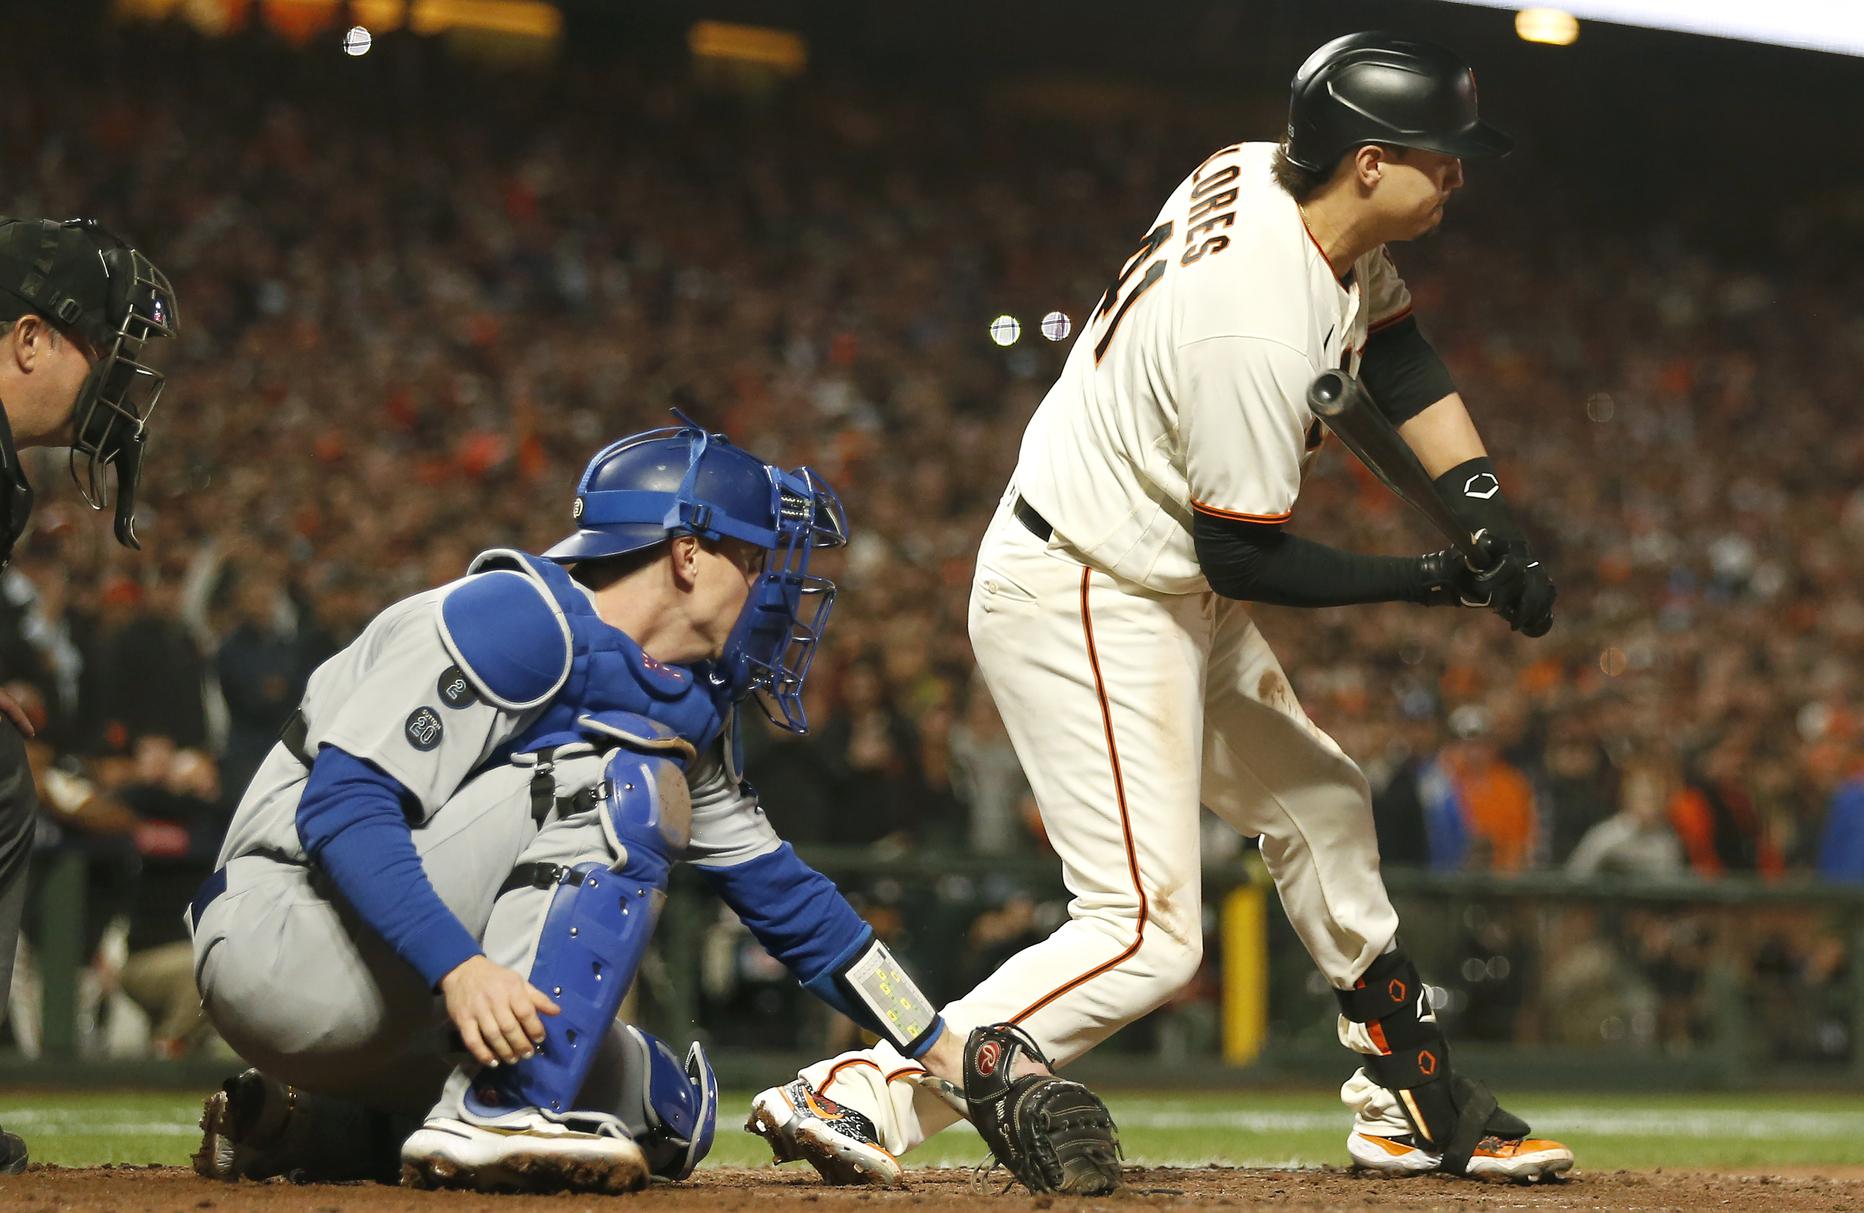 Gabe Morales' check swing call was an inexcusable way to end the Giants' season - San Francisco Chronicle